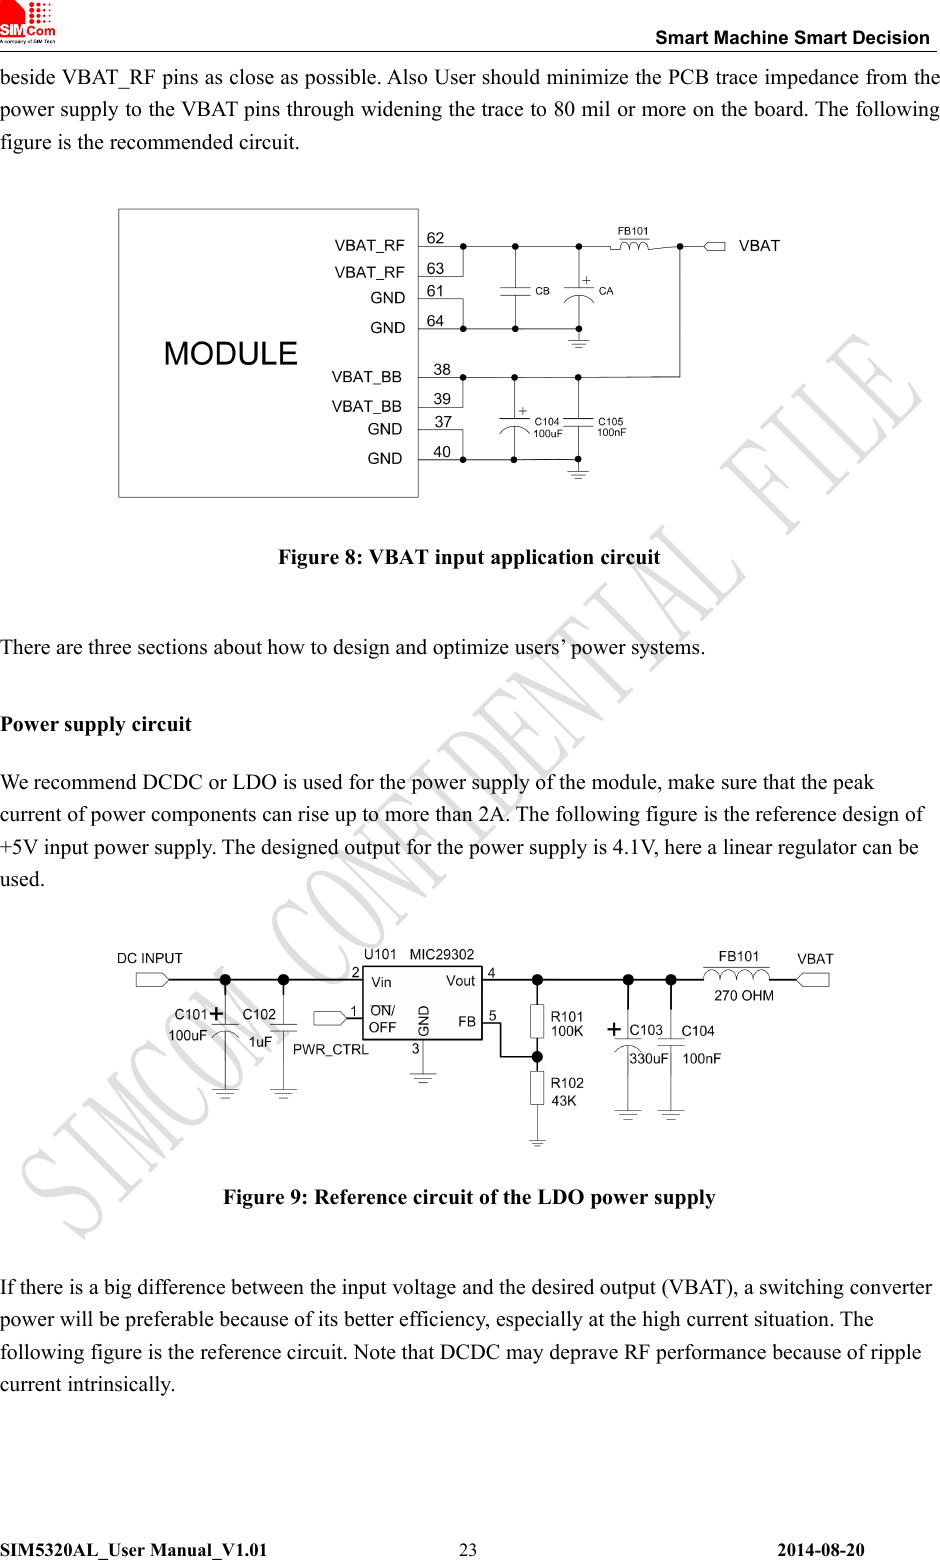 Smart Machine Smart DecisionSIM5320AL_User Manual_V1.01 2014-08-2023beside VBAT_RF pins as close as possible. Also User should minimize the PCB trace impedance from thepower supply to the VBAT pins through widening the trace to 80 mil or more on the board. The followingfigure is the recommended circuit.Figure 8: VBAT input application circuitThere are three sections about how to design and optimize users’ power systems.Power supply circuitWe recommend DCDC or LDO is used for the power supply of the module, make sure that the peakcurrent of power components can rise up to more than 2A. The following figure is the reference design of+5V input power supply. The designed output for the power supply is 4.1V, here a linear regulator can beused.Figure 9: Reference circuit of the LDO power supplyIf there is a big difference between the input voltage and the desired output (VBAT), a switching converterpower will be preferable because of its better efficiency, especially at the high current situation. Thefollowing figure is the reference circuit. Note that DCDC may deprave RF performance because of ripplecurrent intrinsically.